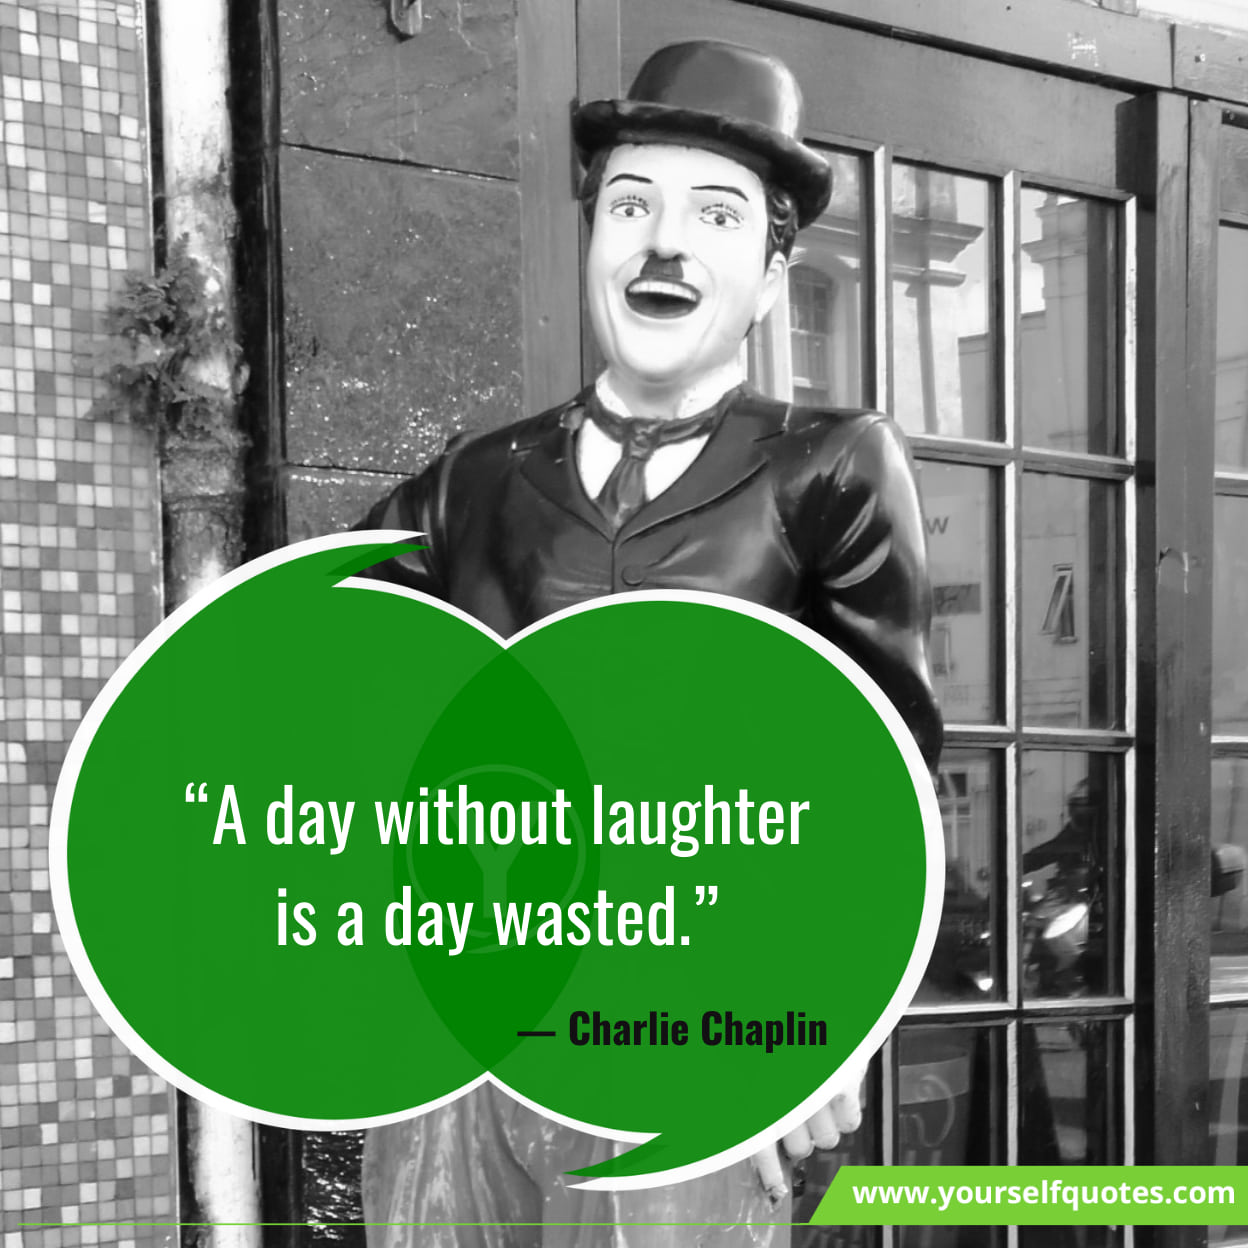 Charlie Chaplin Famous Quotes